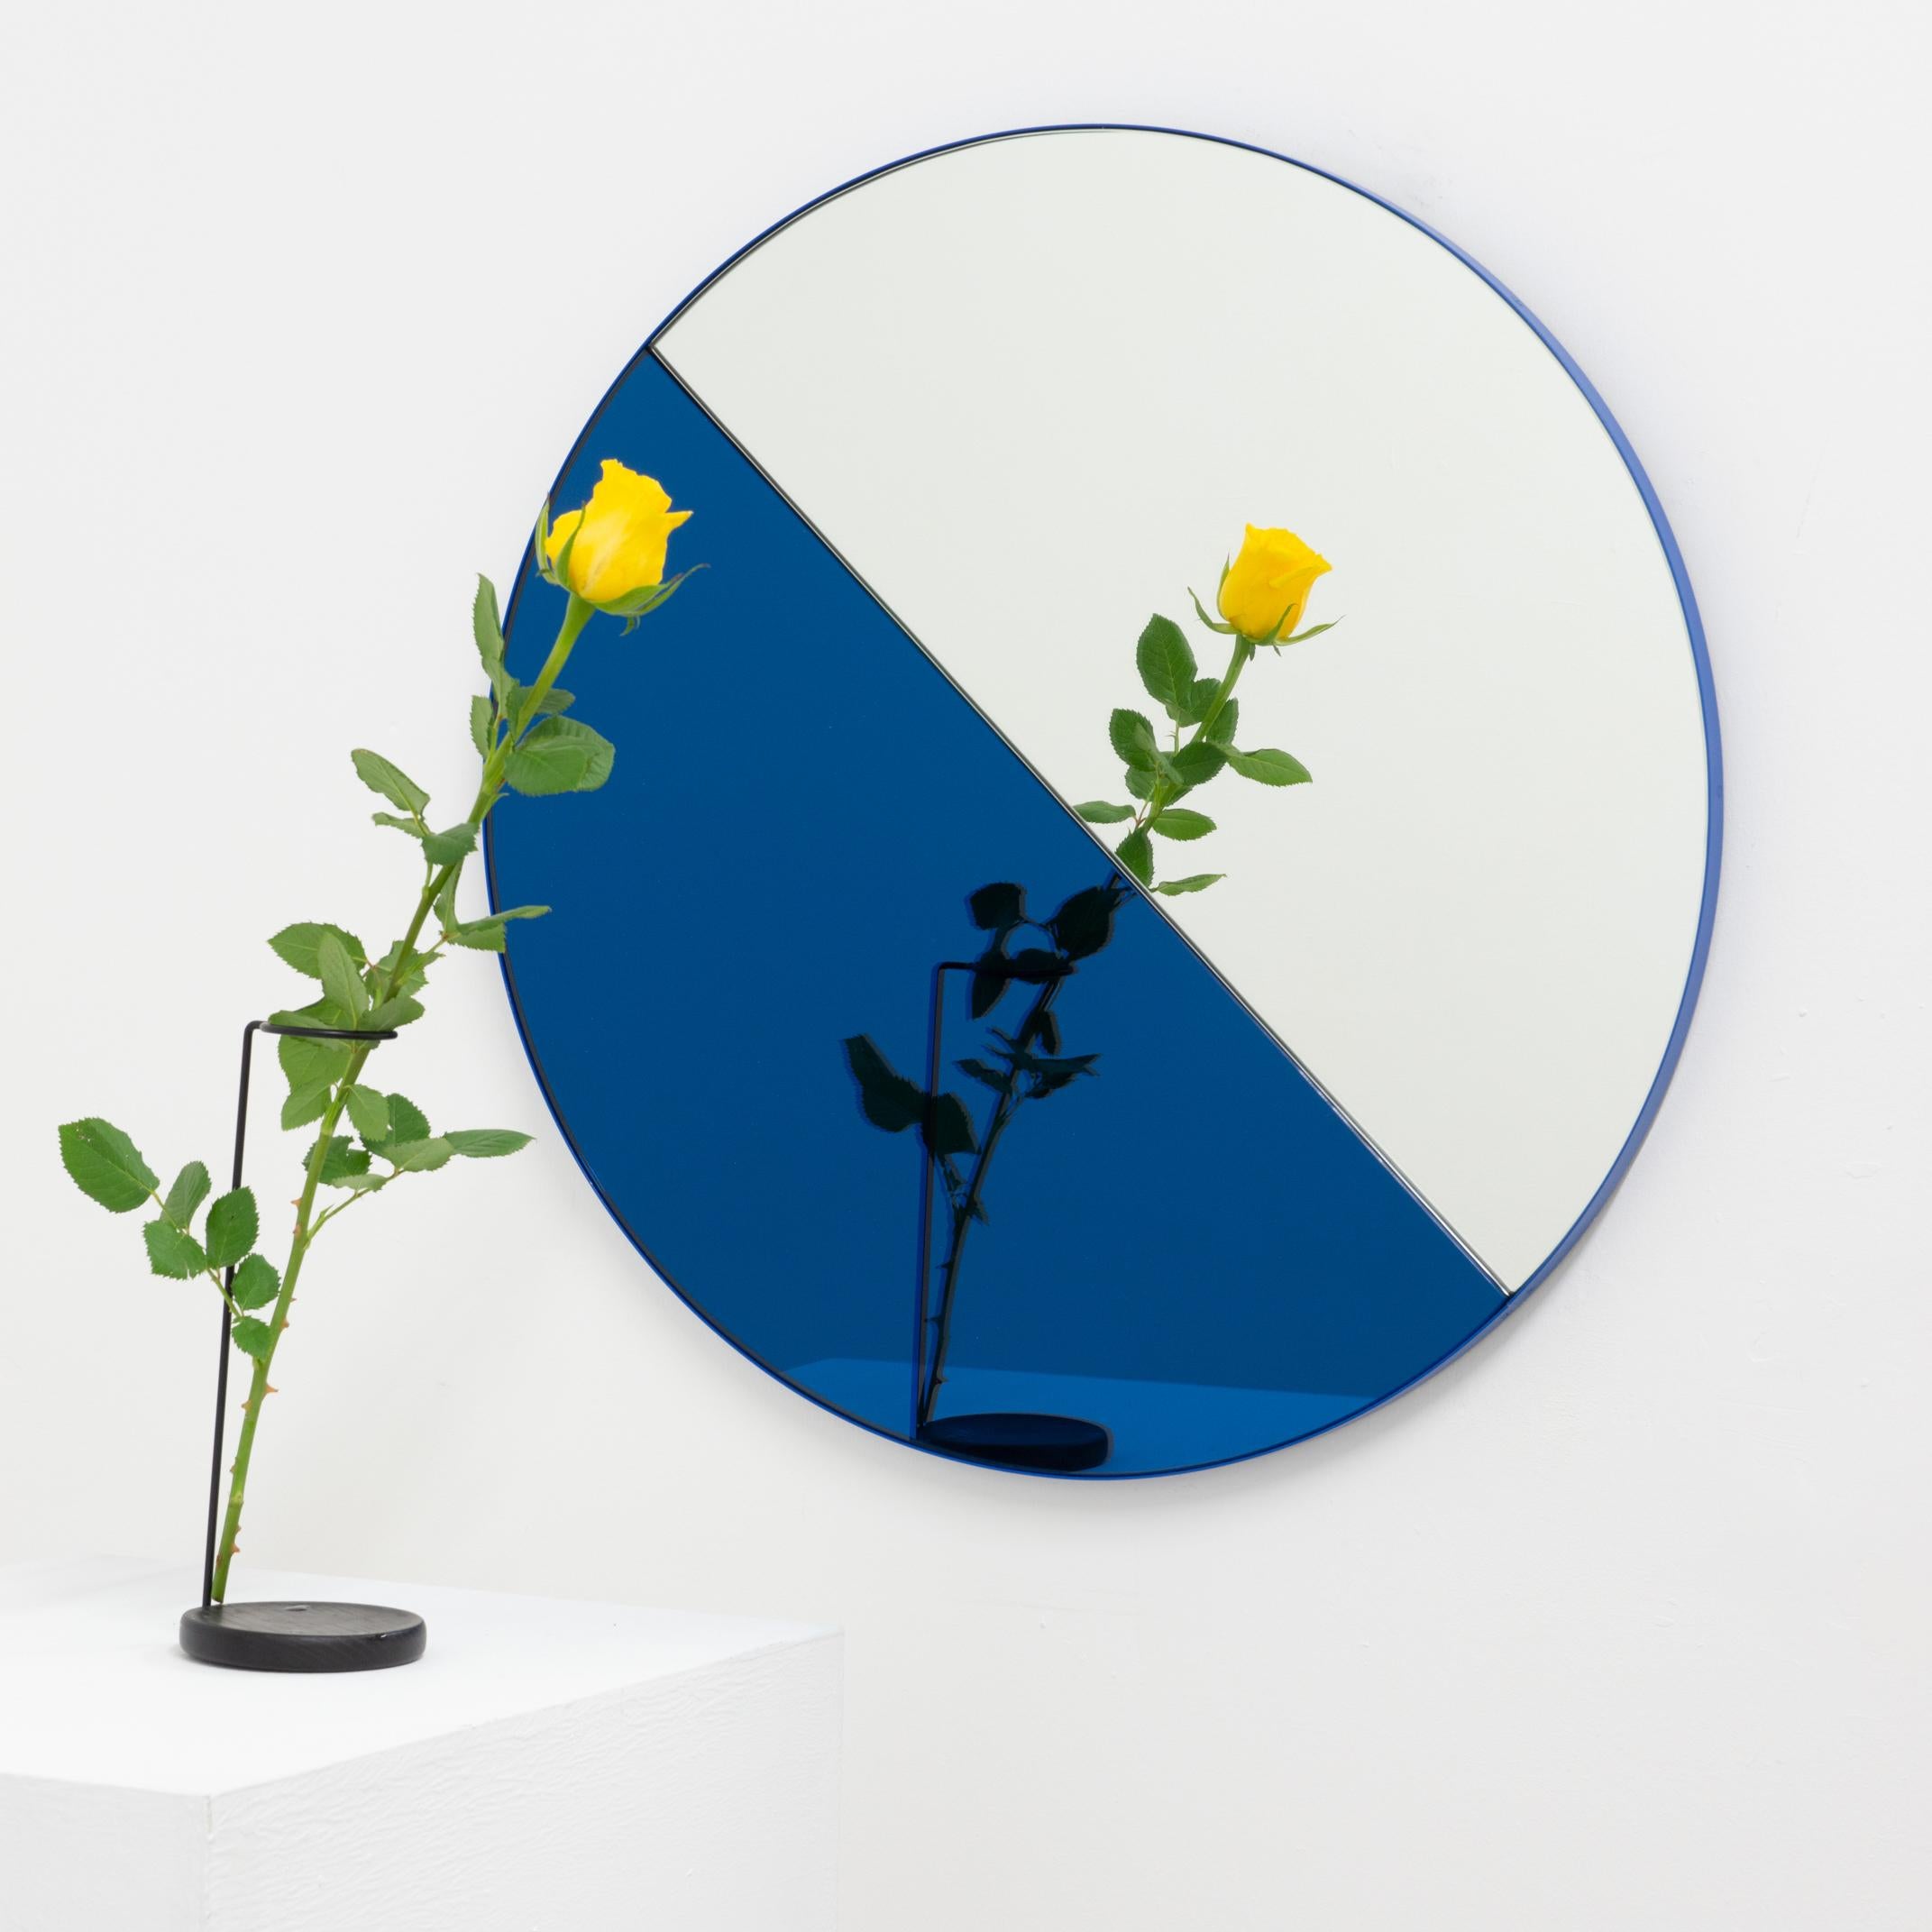 Contemporary mixed blue and silver mirror tints Dualis Orbis with a blue frame. Designed and handcrafted in London, UK.

Supplied fully fitted with a specialist hanging system that allows the mirror to be hung in four different positions. 

Shipped